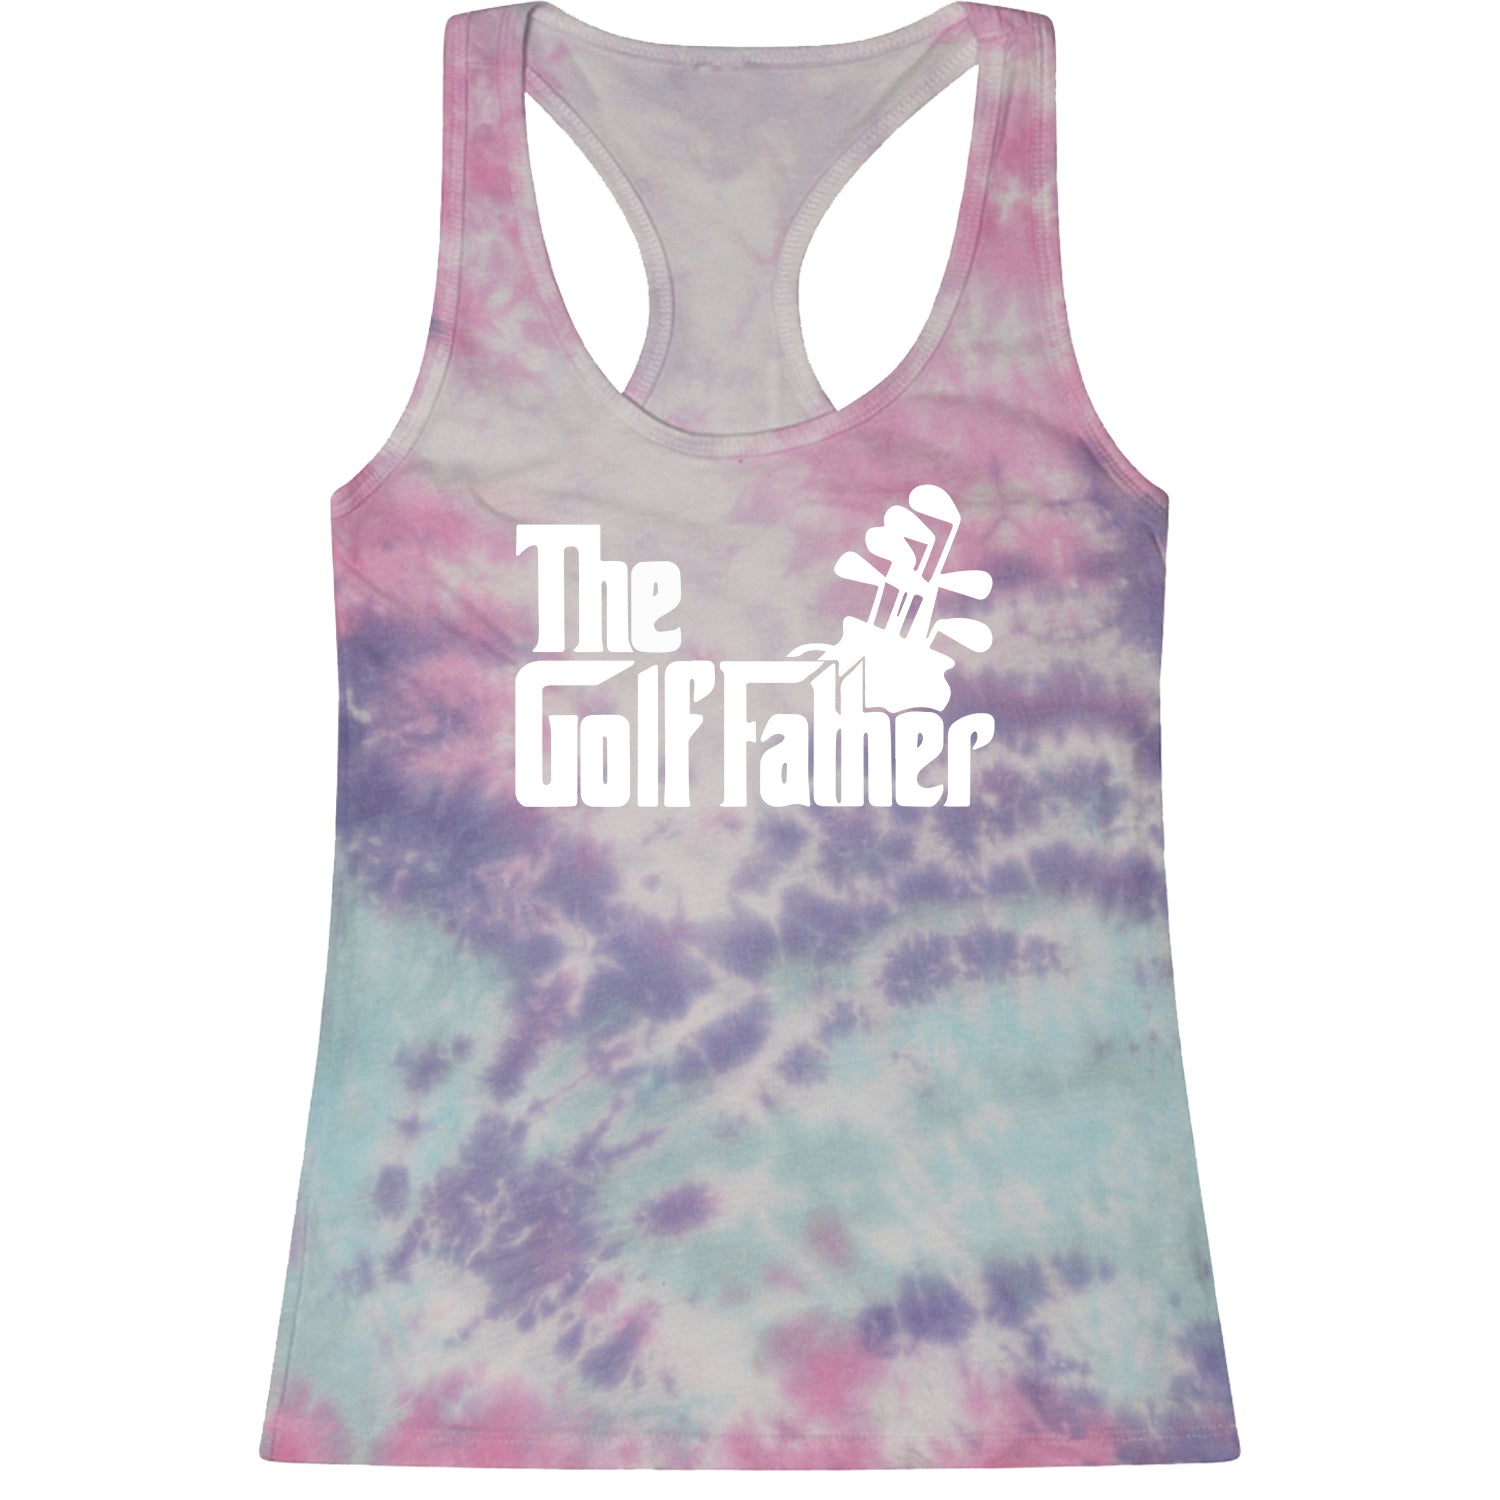 The Golf Father Golfing Dad Racerback Tank Top for Women #expressiontees by Expression Tees